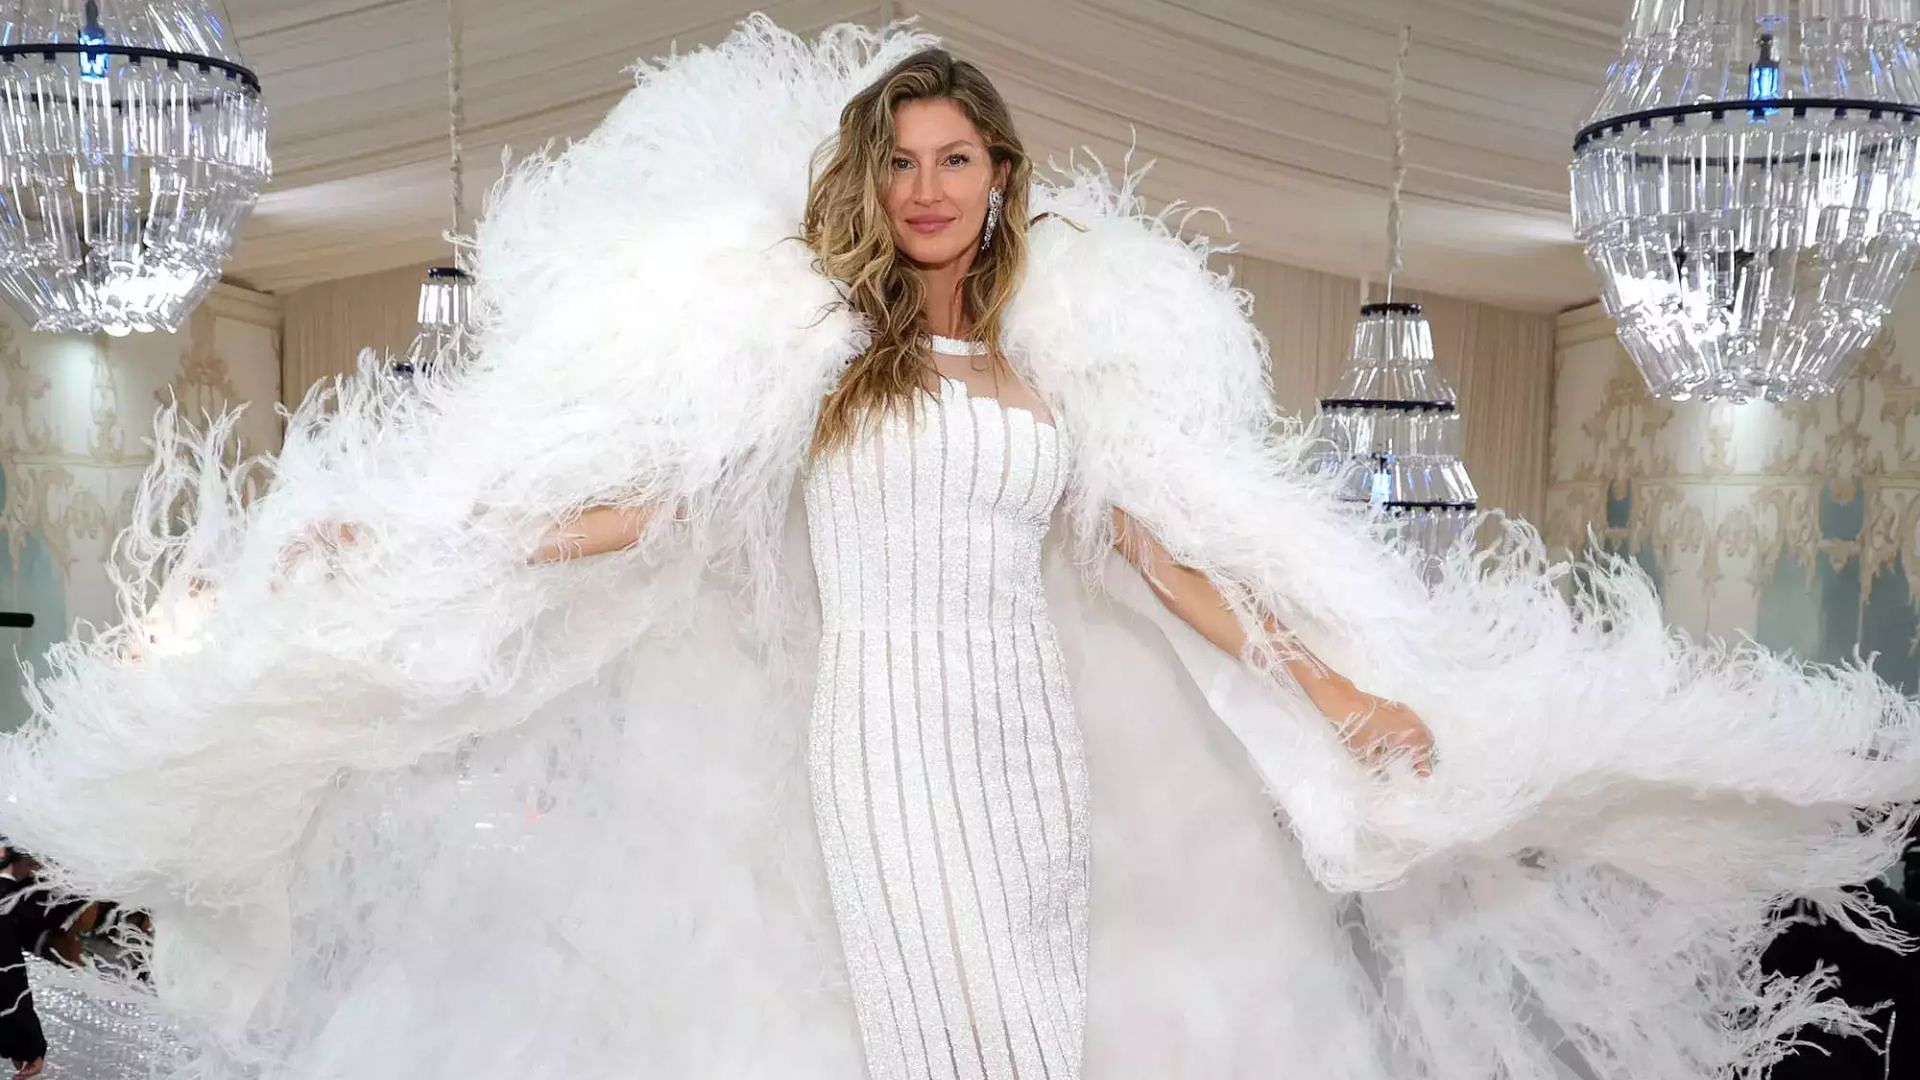 Gisele Bundchen dons stunning Chanel outfit in first Met Gala appearance post-Tom Brady breakup (Image credit: Kevin Mazur/Getty Images)